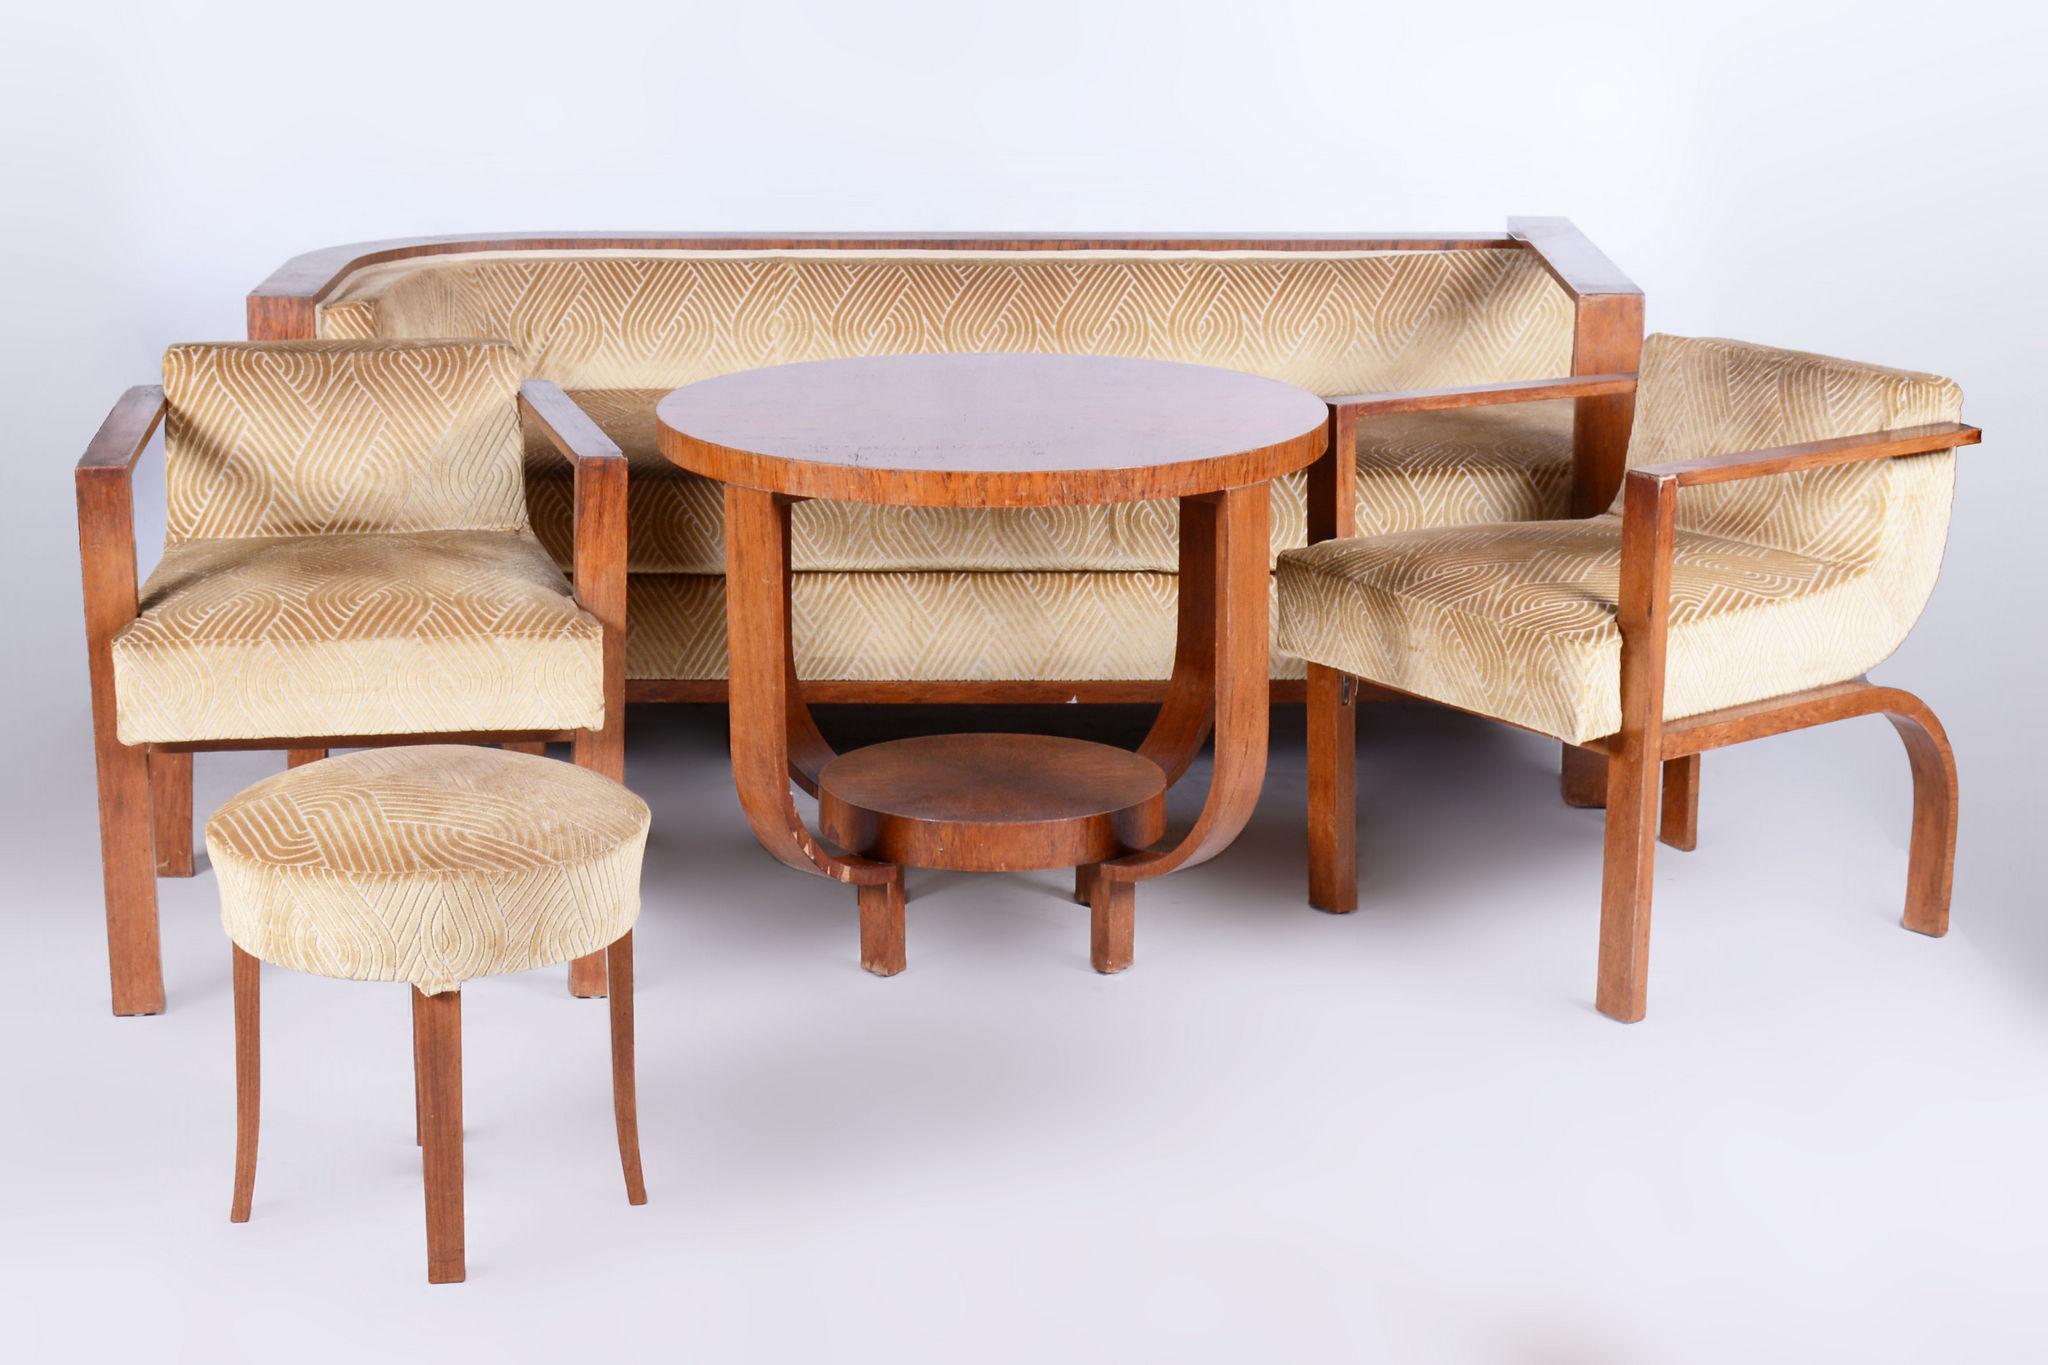 Palisander Seating Set with Coffee Table, Art Deco, Restored, France, 1920s For Sale 9